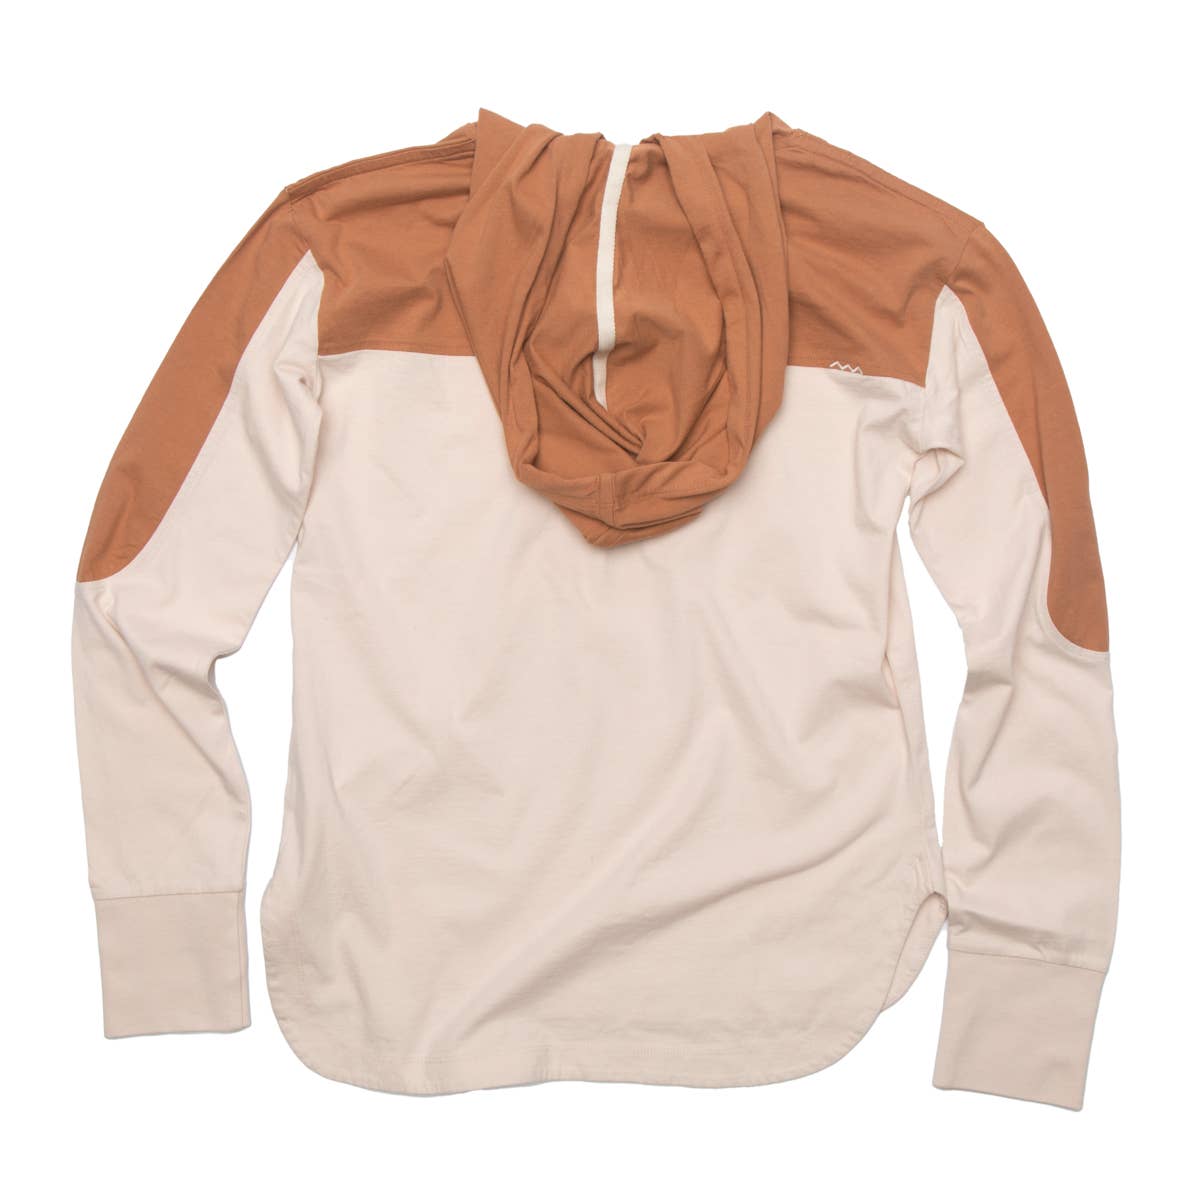 Women's Basecamp Hoodie - Storm and Sky Shoppe - The Landmark Project